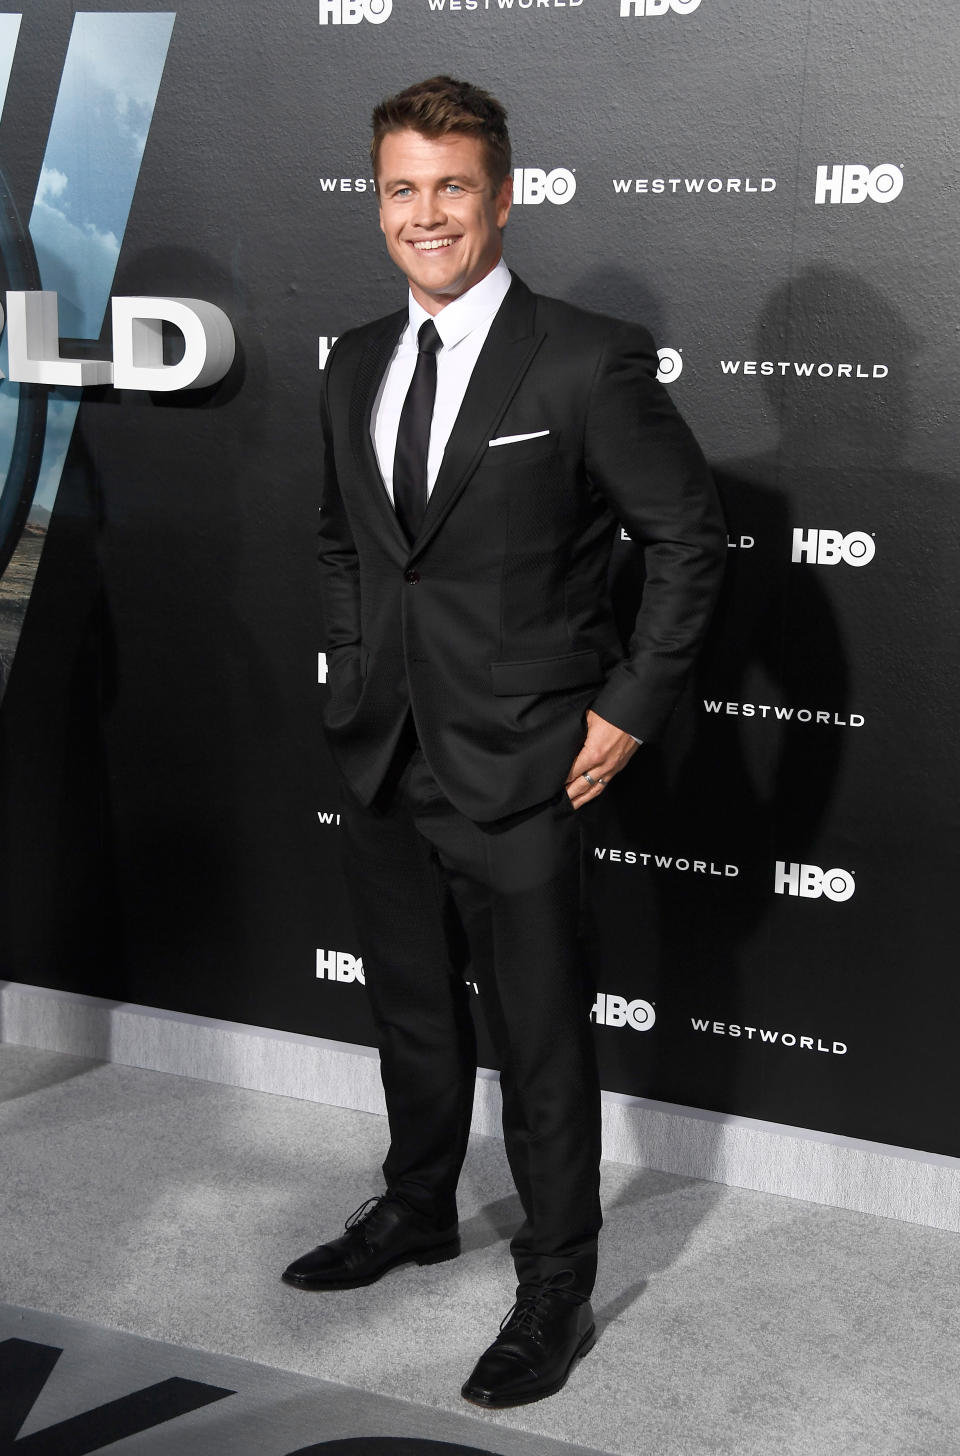 Premiere Of HBO's "Westworld" - Arrivals